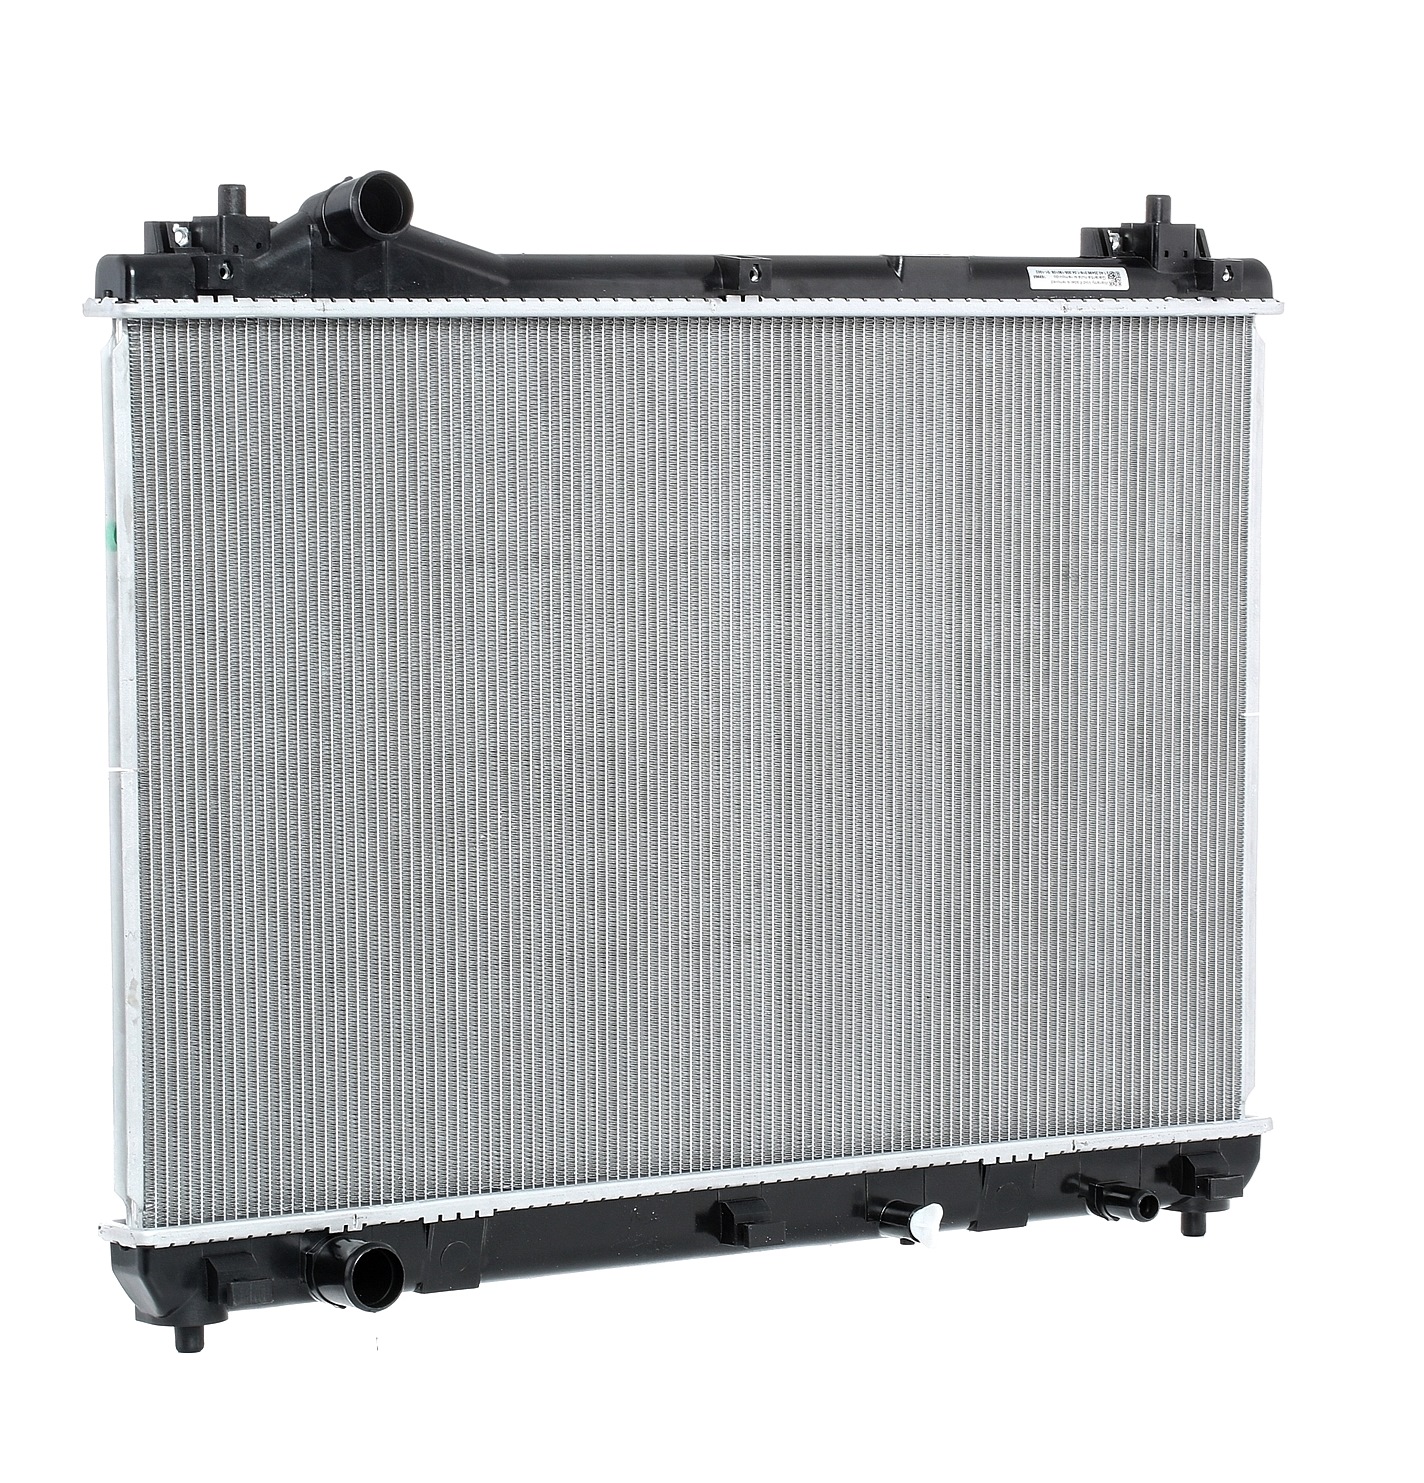 470R0336 RIDEX Radiators SUZUKI Aluminium, for vehicles with/without air conditioning x 698, 450 x 16 mm, Manual Transmission